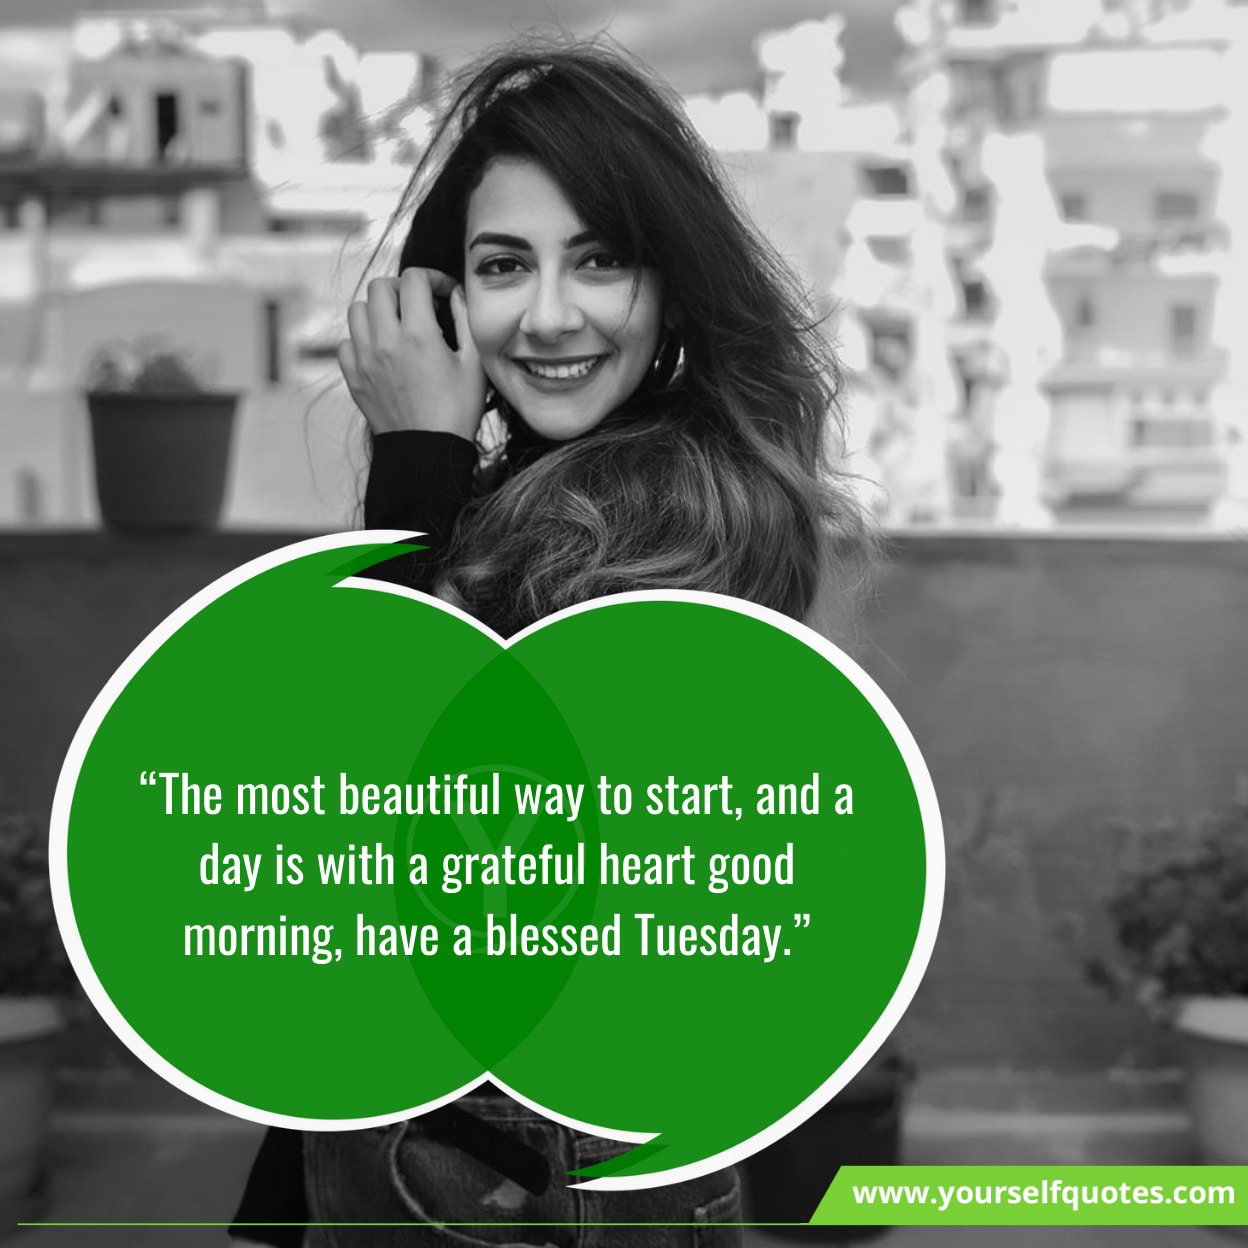 Positive Quotes About Tuesday Good Morning